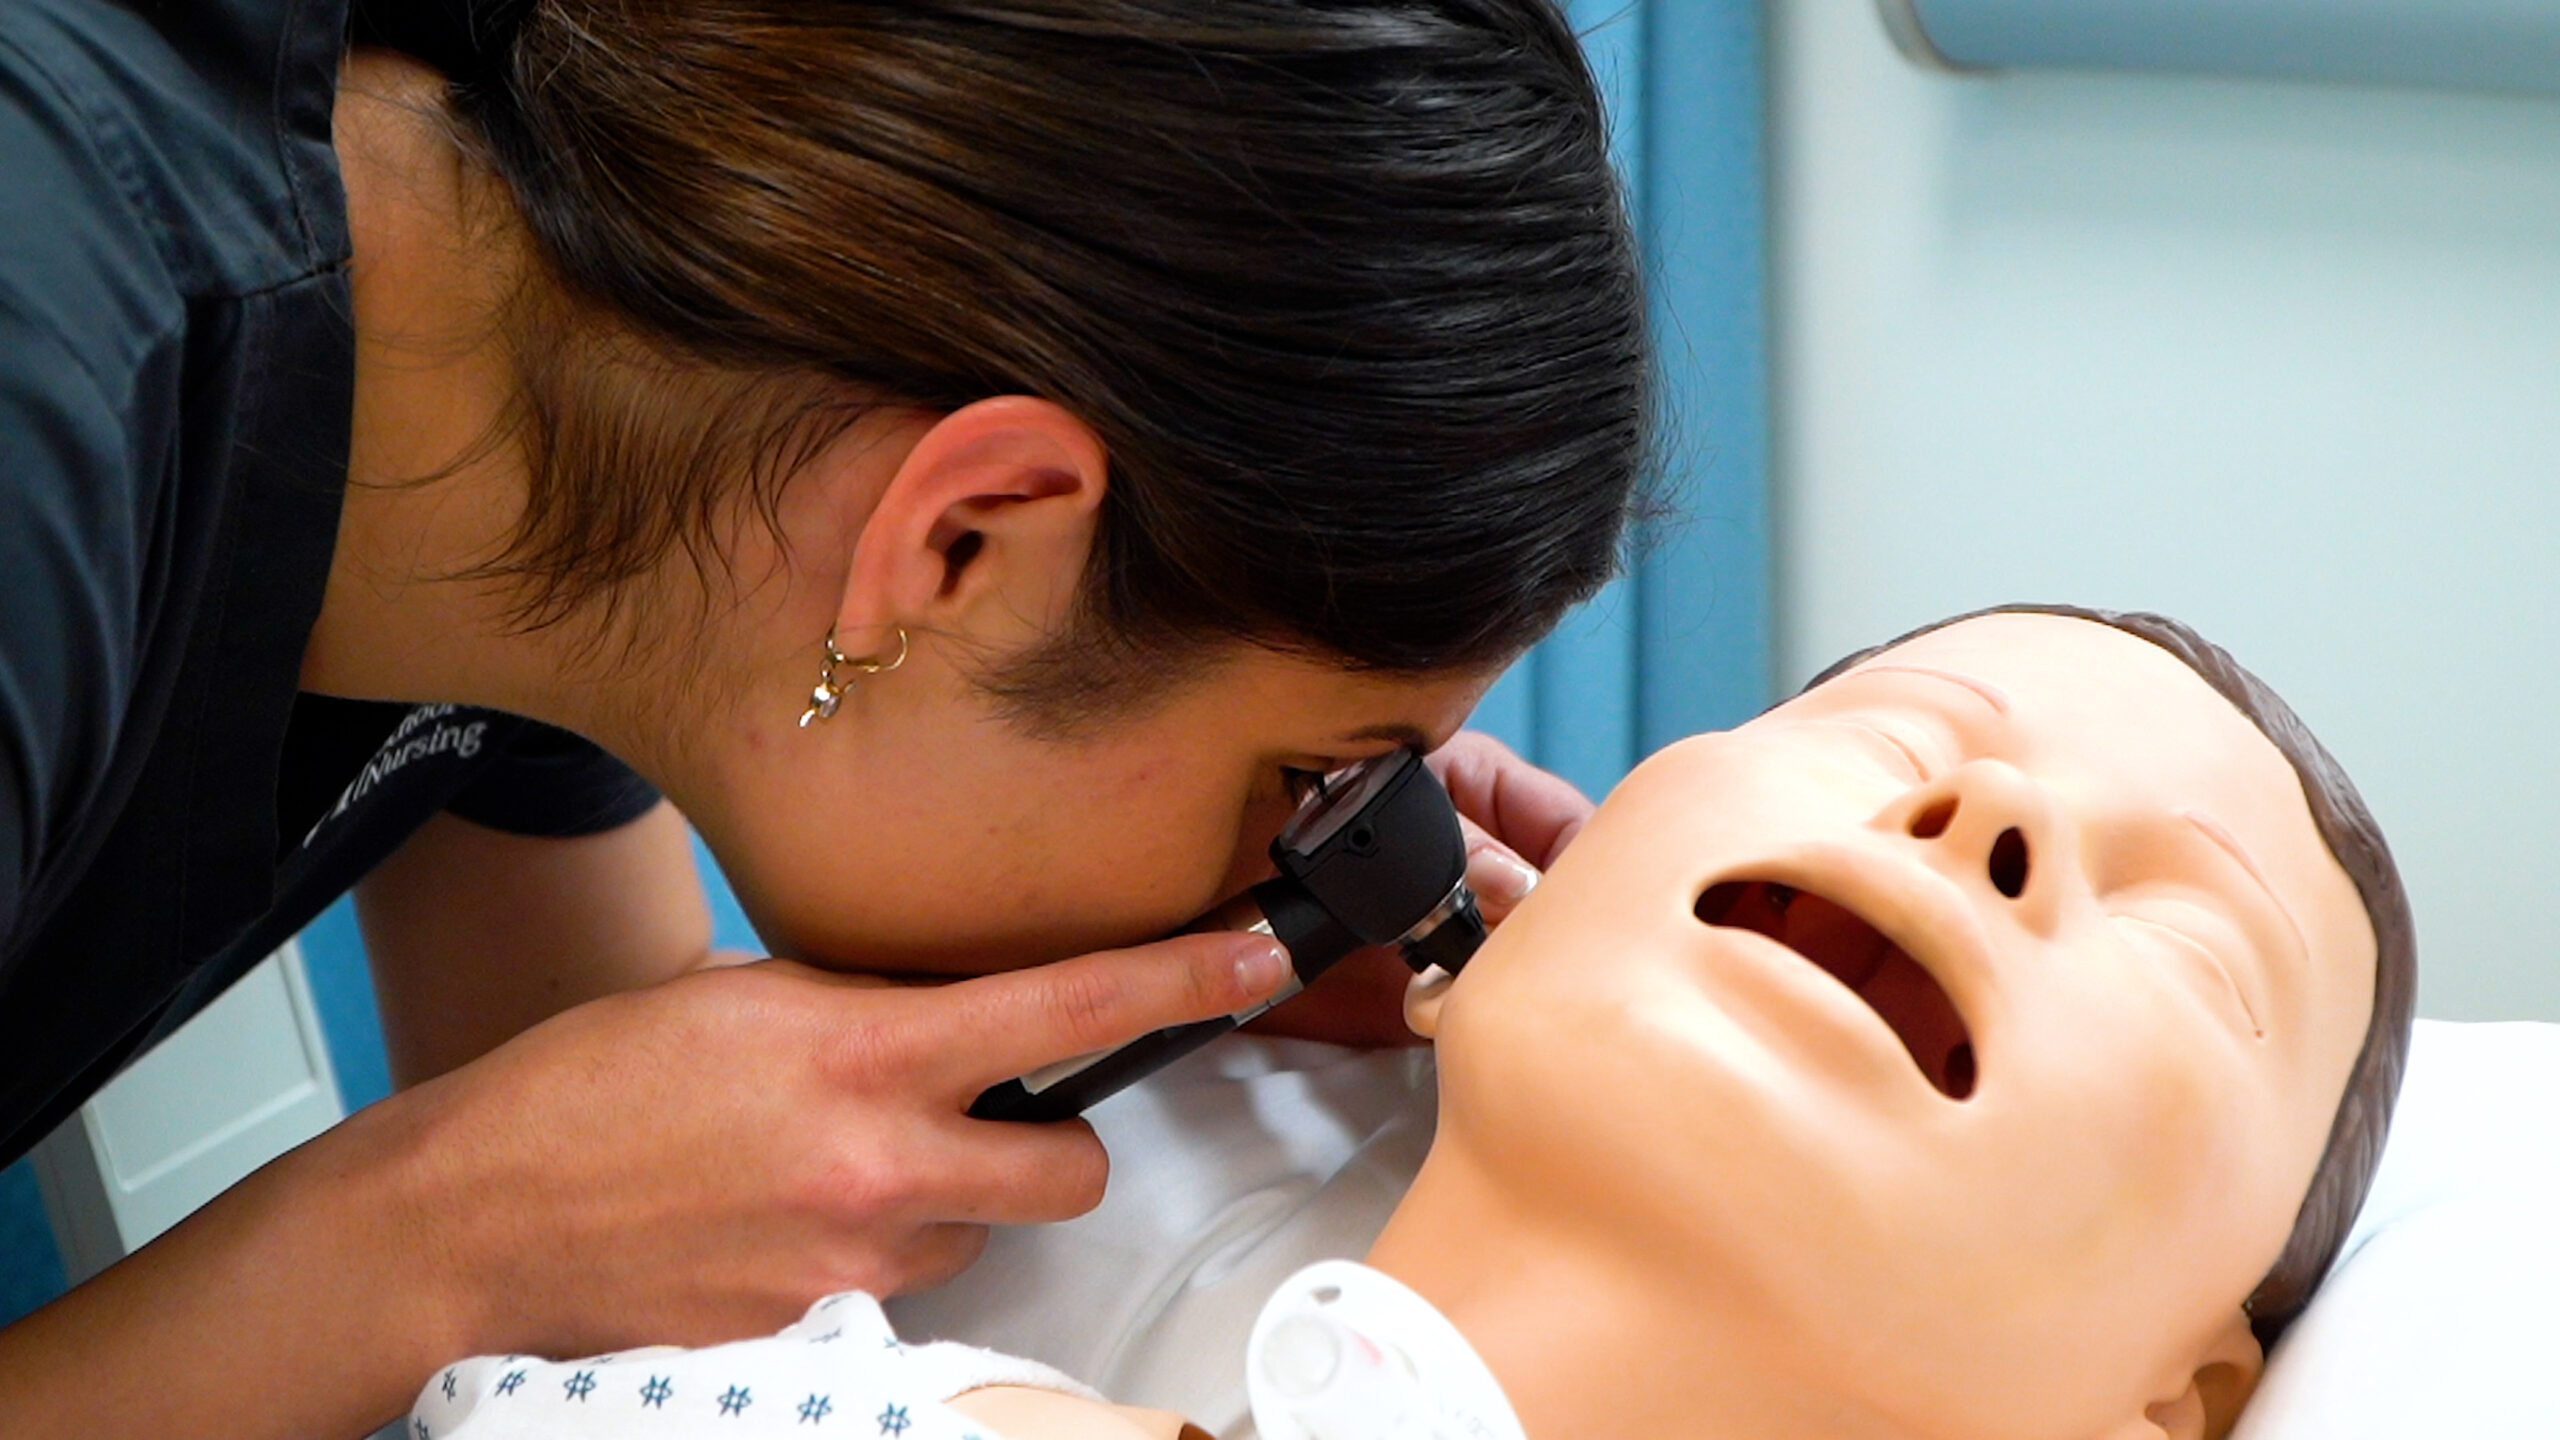 A nursing student using an instrument looks inside the ear of a patient simulator